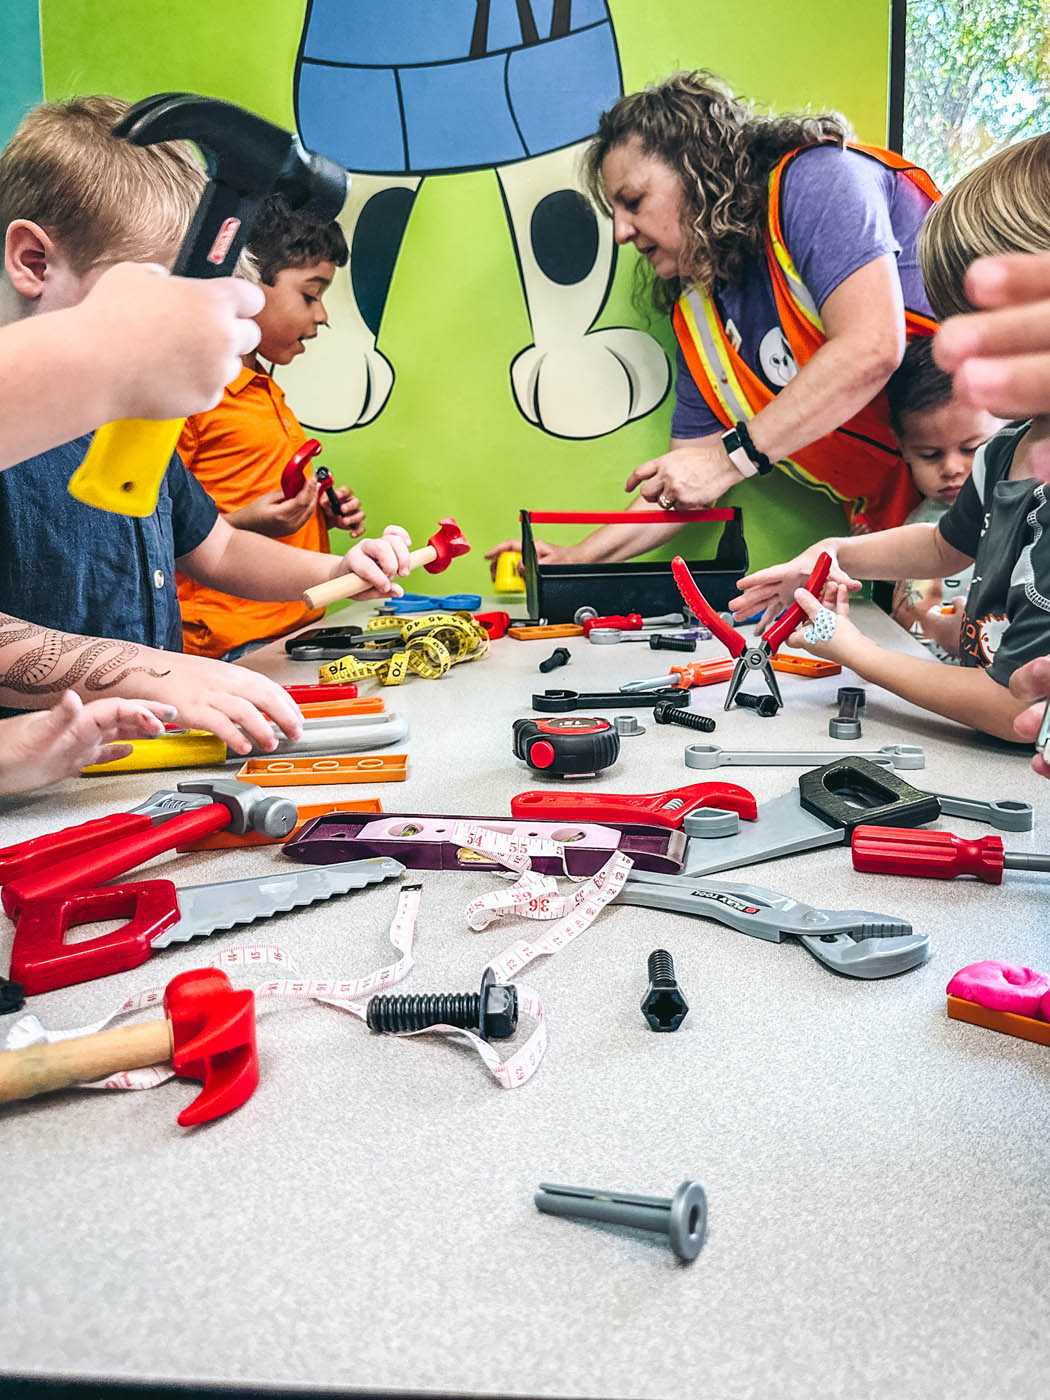 Romp n' Roll North Raleigh hosting a building class for a summer camp for kids in Raleigh, NC.